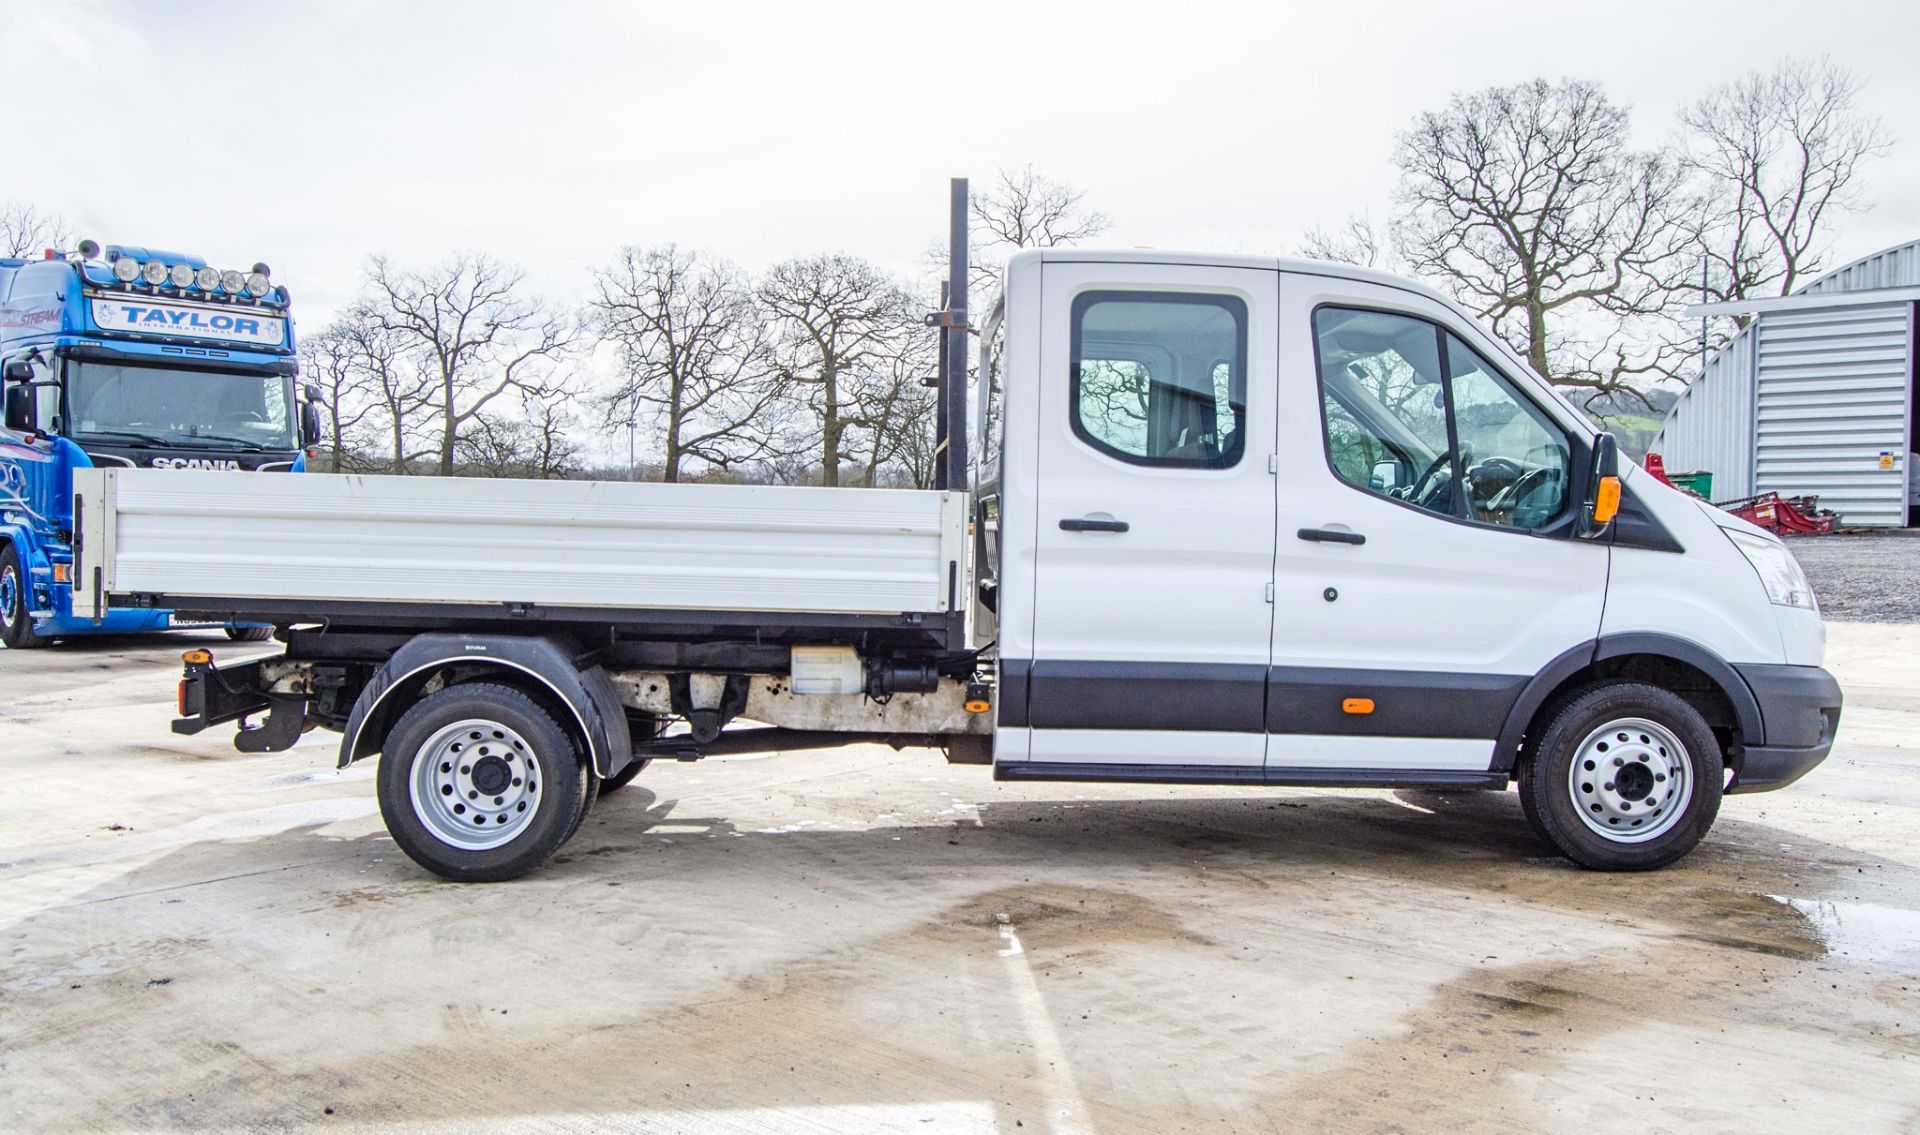 Ford Transit 350 2198cc 6 speed manual crew cab tipper  Registration Number: FP65 DHD Date of - Image 7 of 35